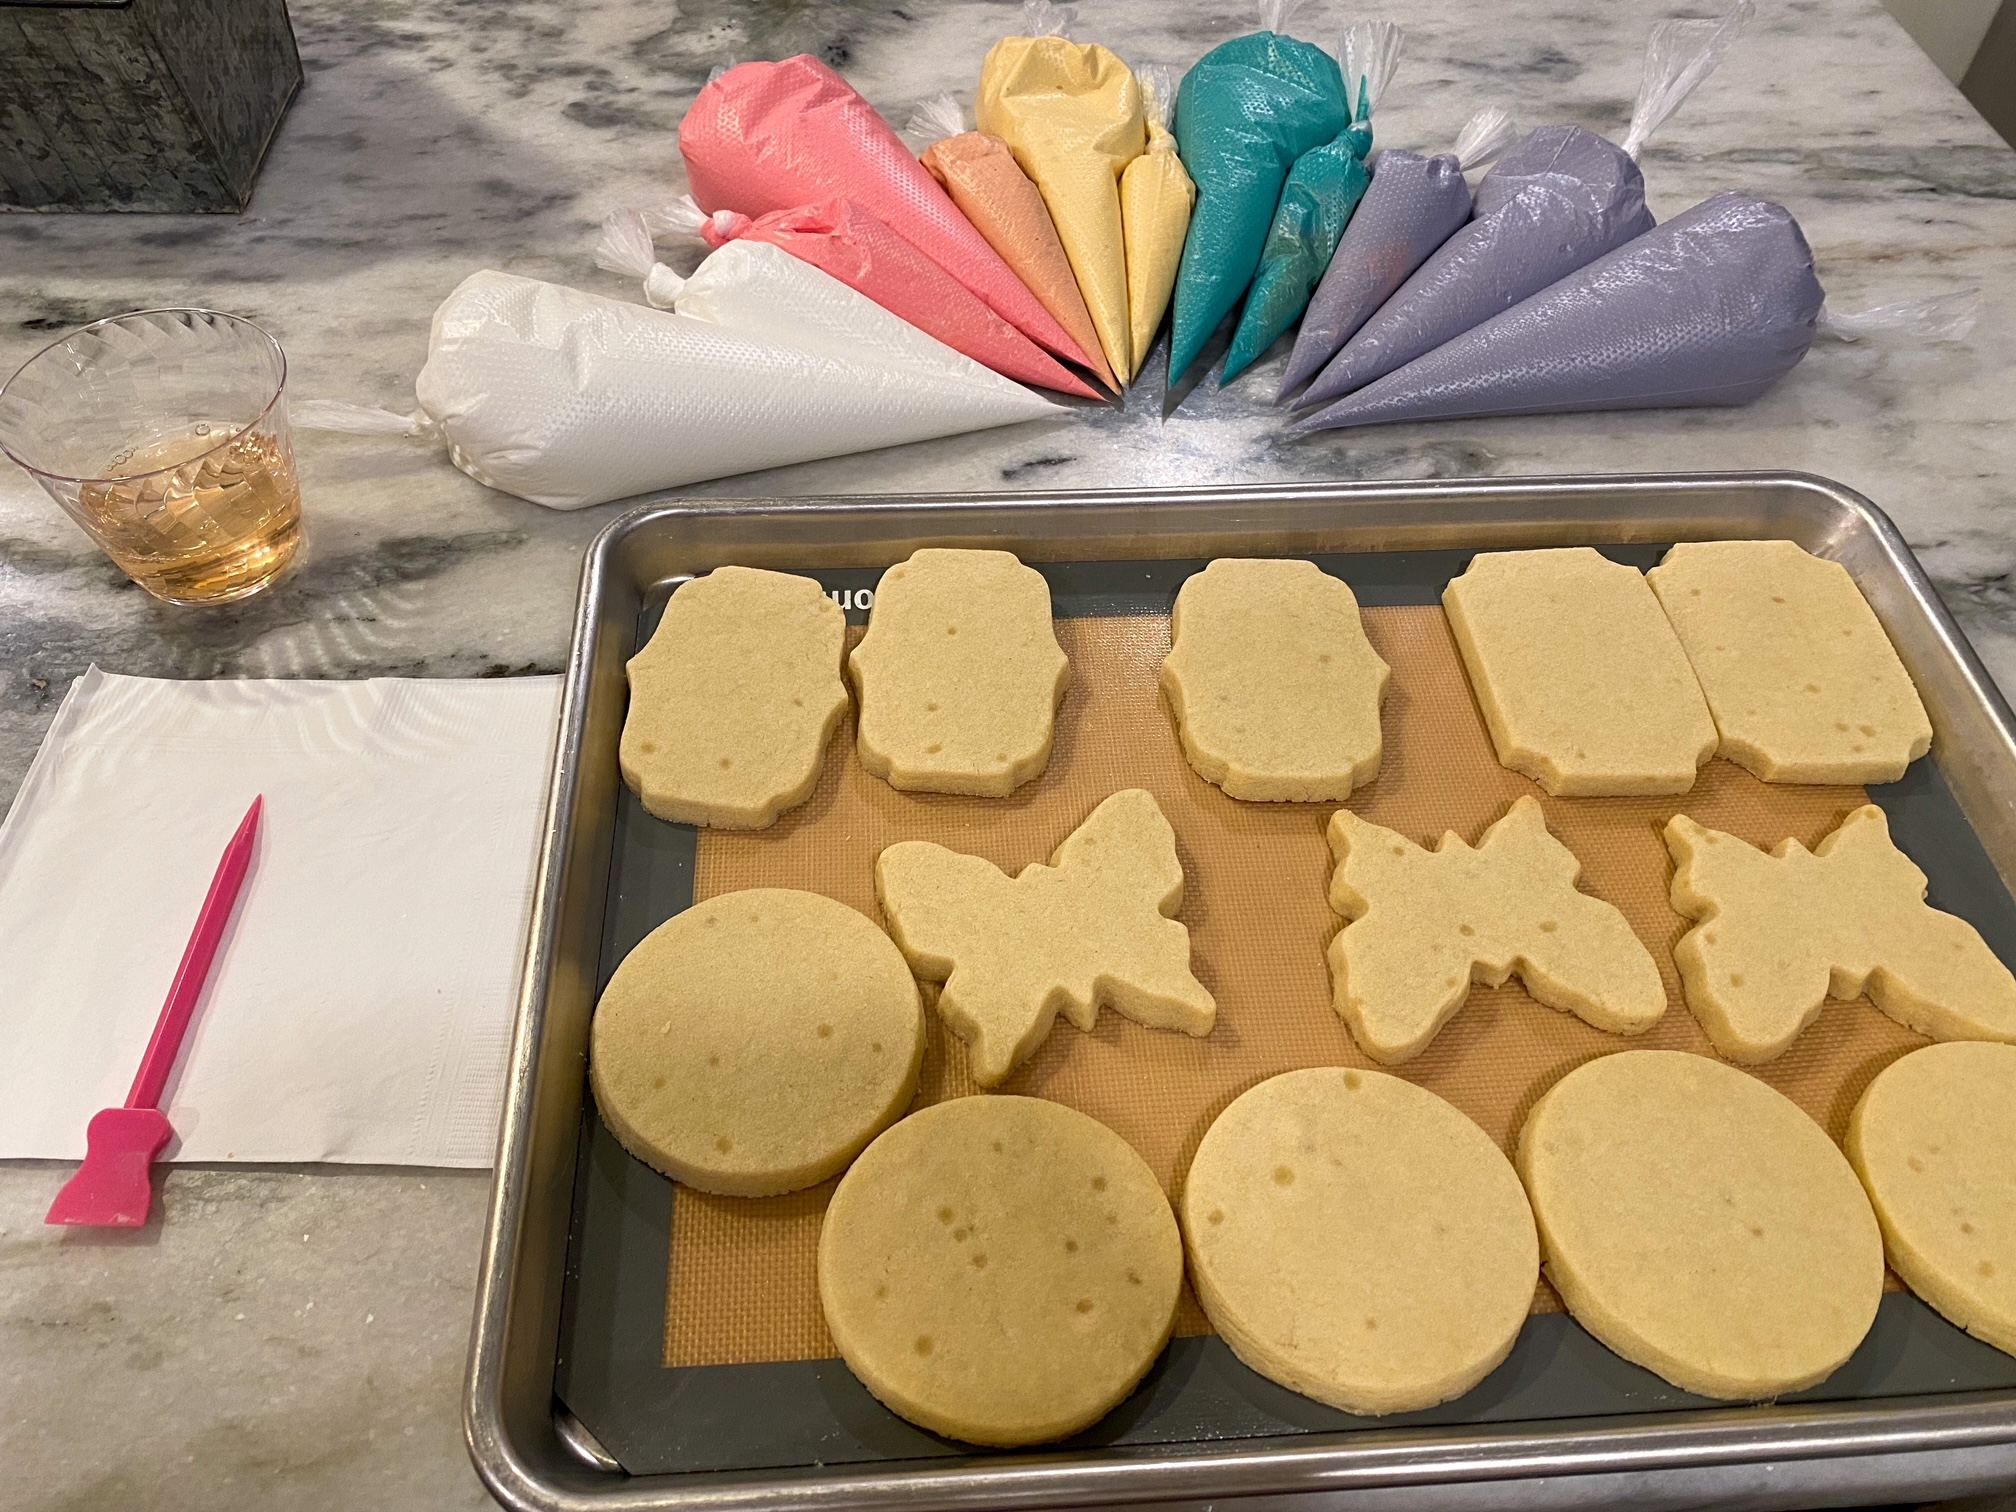 Undecorated cookies on a baking sheet